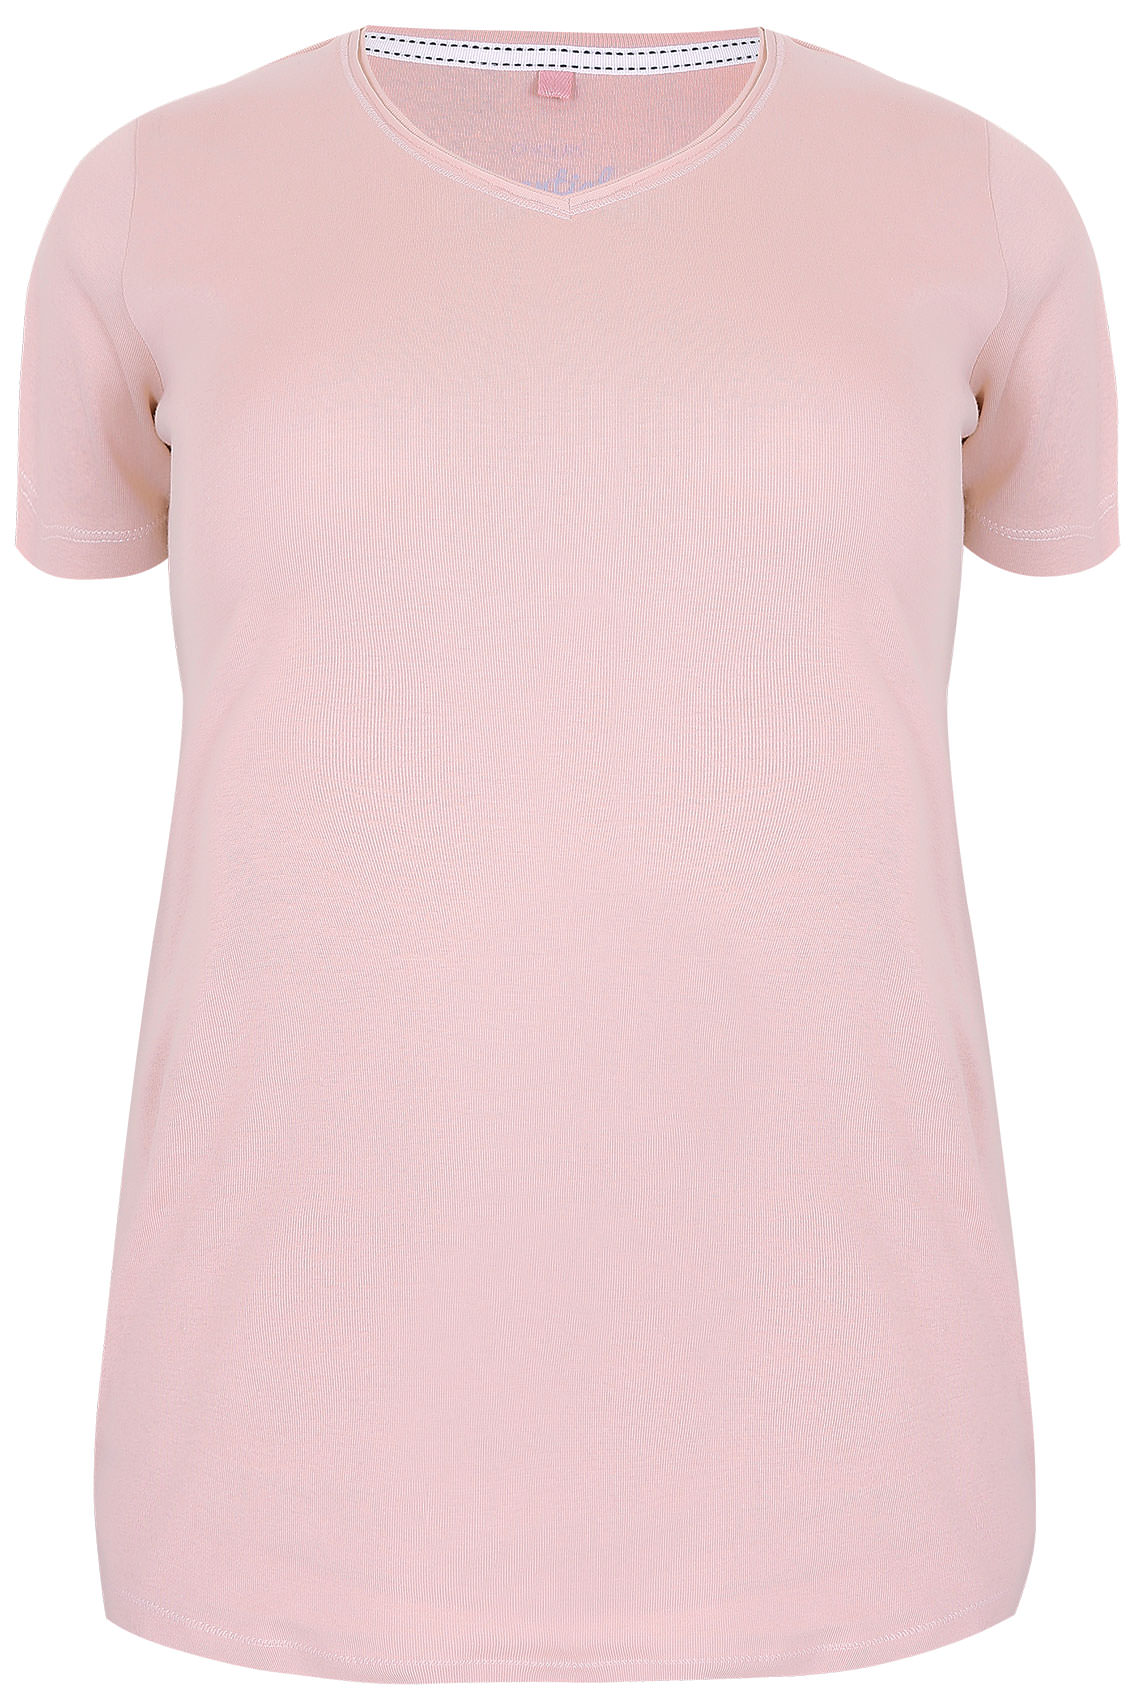 Y Urs Yours Blush Pink Pure Cotton Ribbed V Neck T Shirt Plus